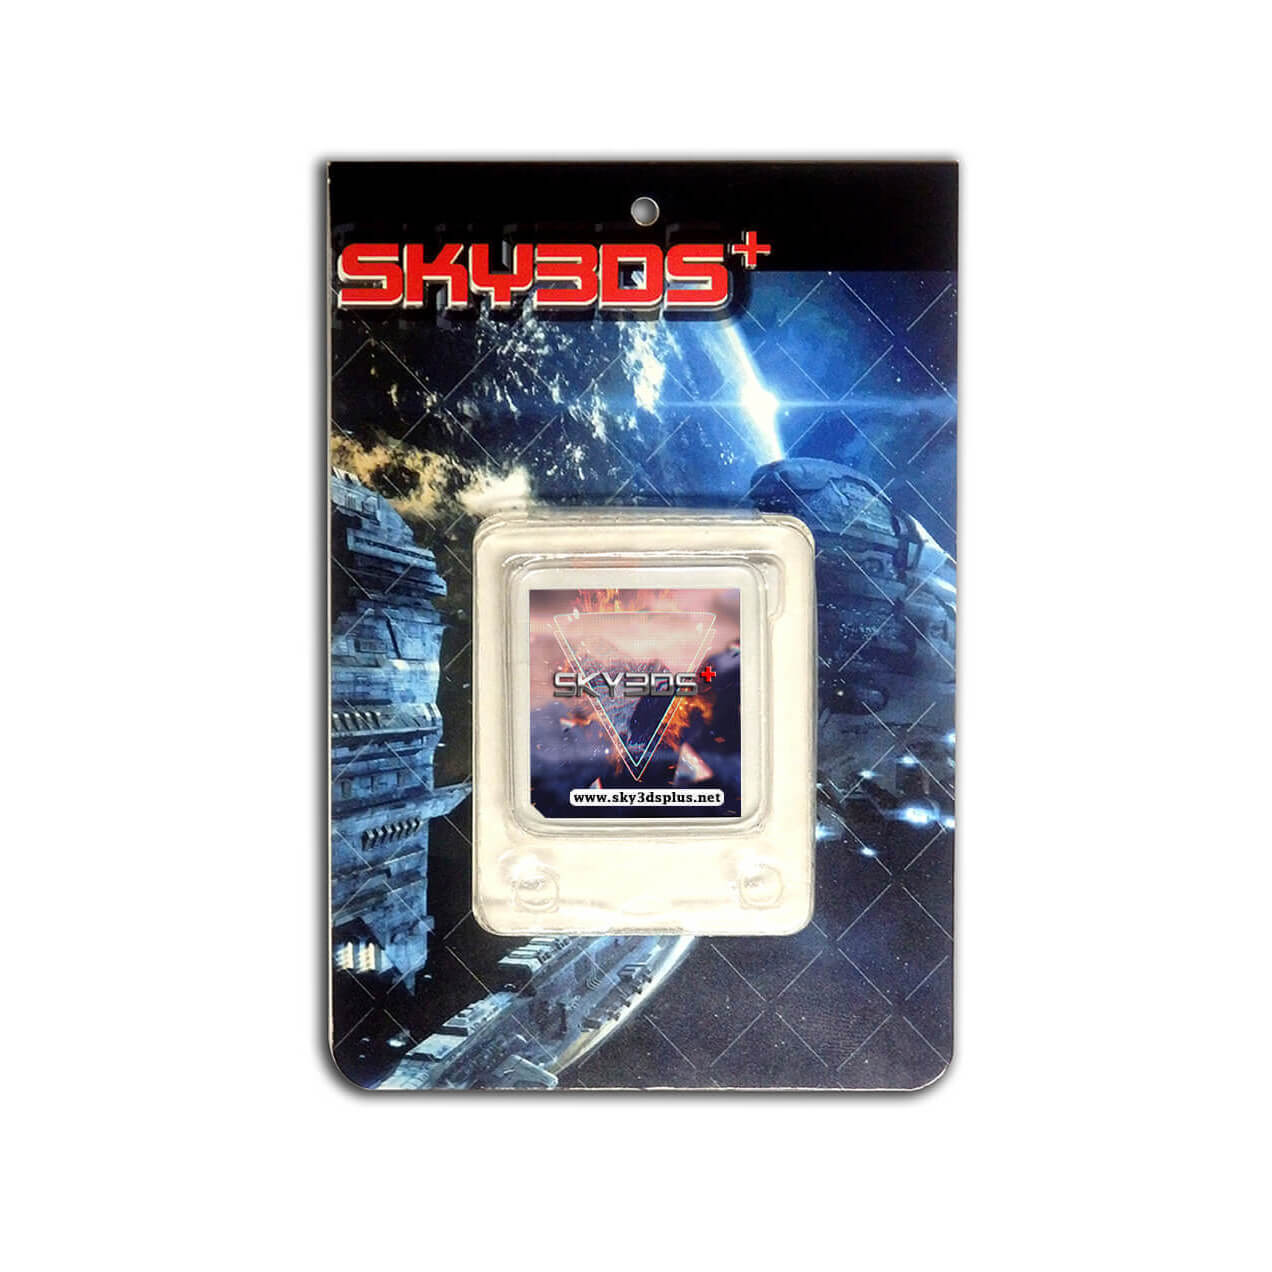 Sky3ds+ Plus flashcard for 3ds game